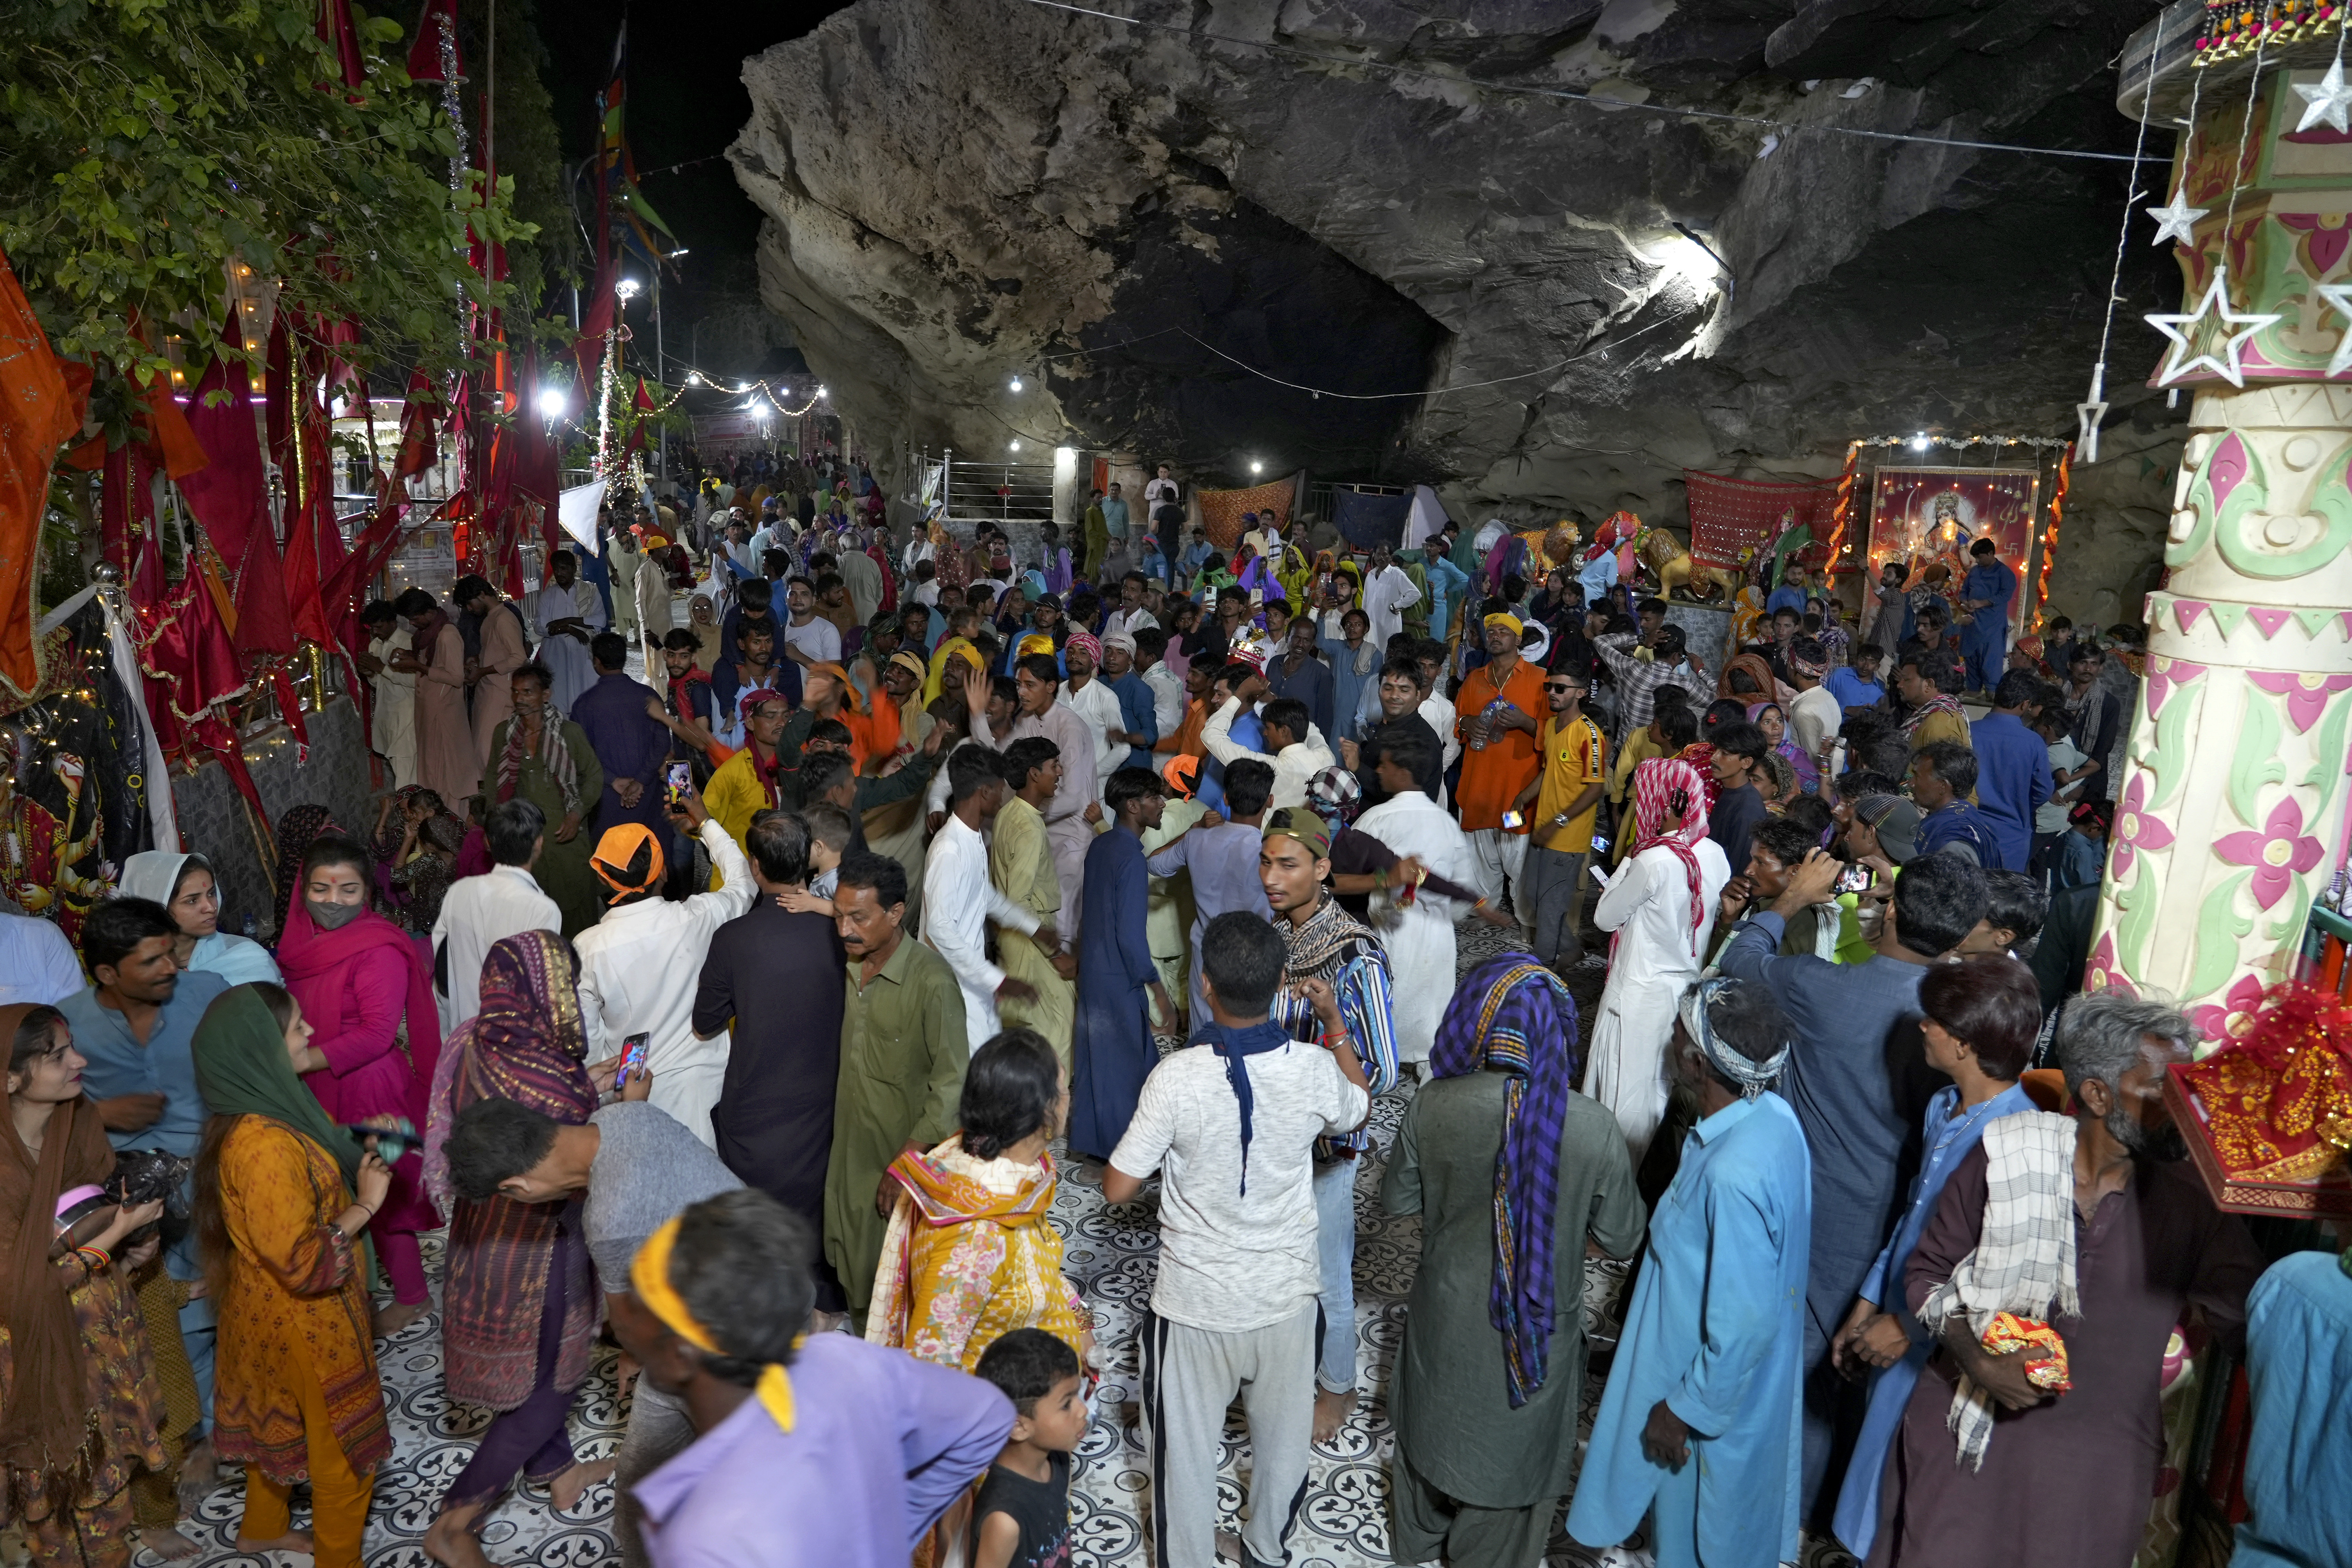 Hindu devotees attend an annual festival in an ancient cave temple of Hinglaj Mata in Hinglaj in Lasbela district in the Pakistan's southwestern Baluchistan province, Friday, April 26